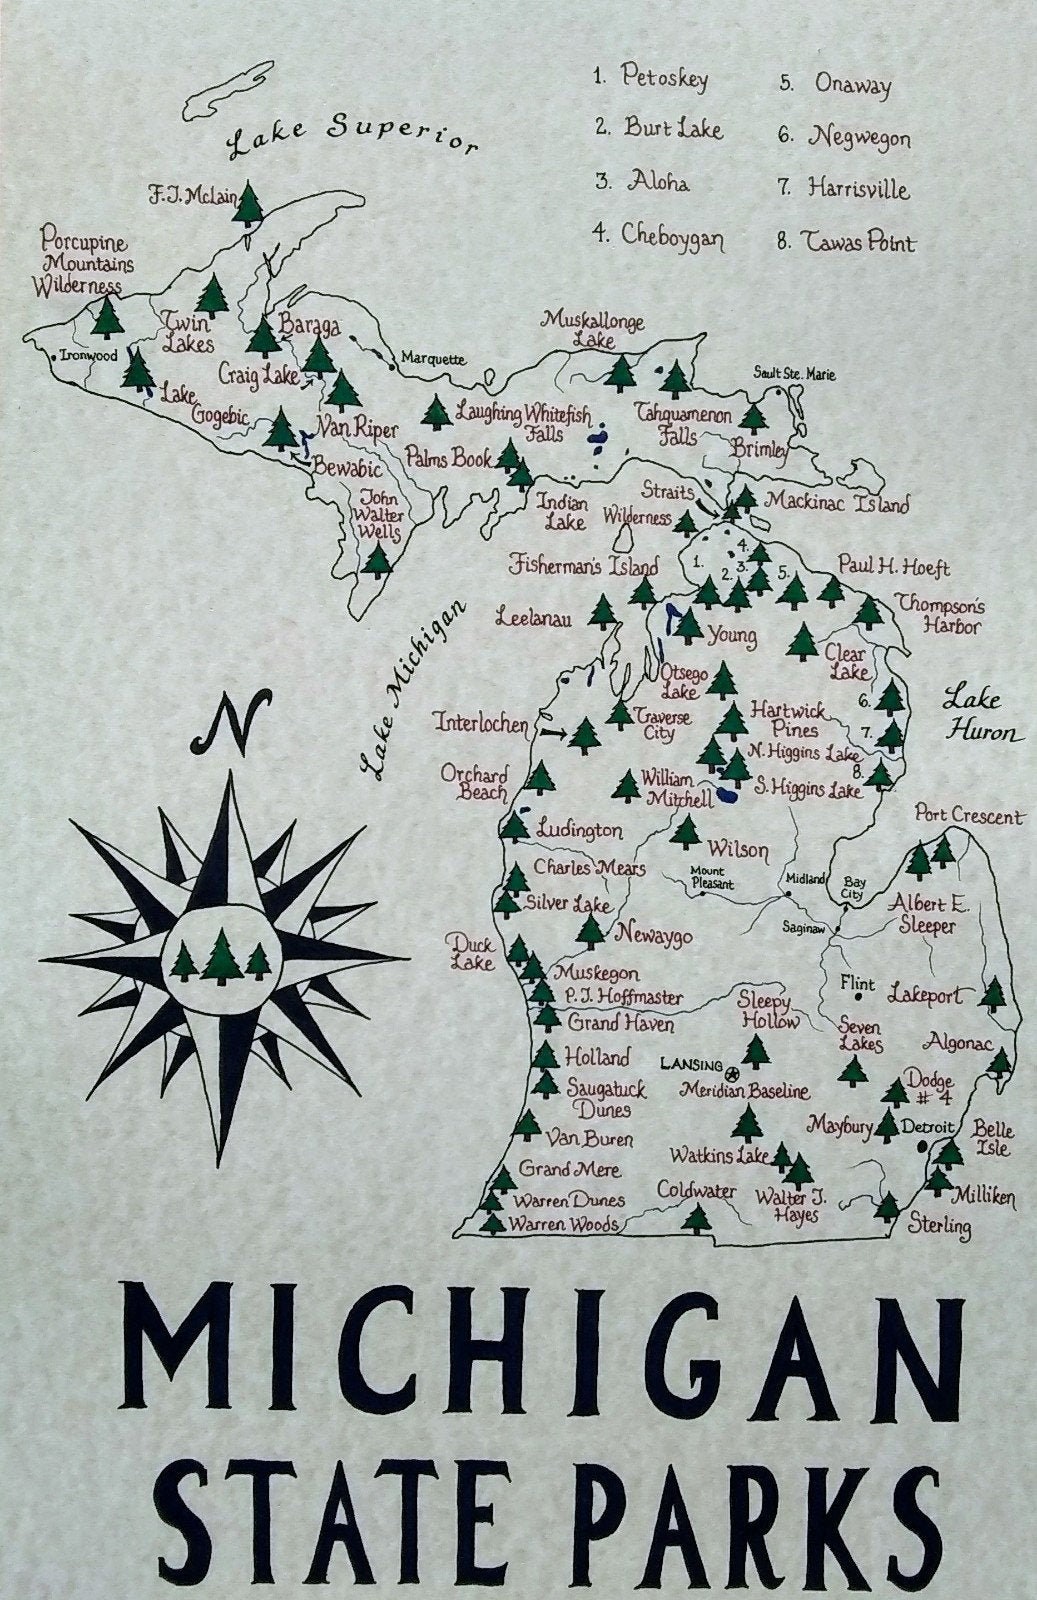 Michigan State Parks